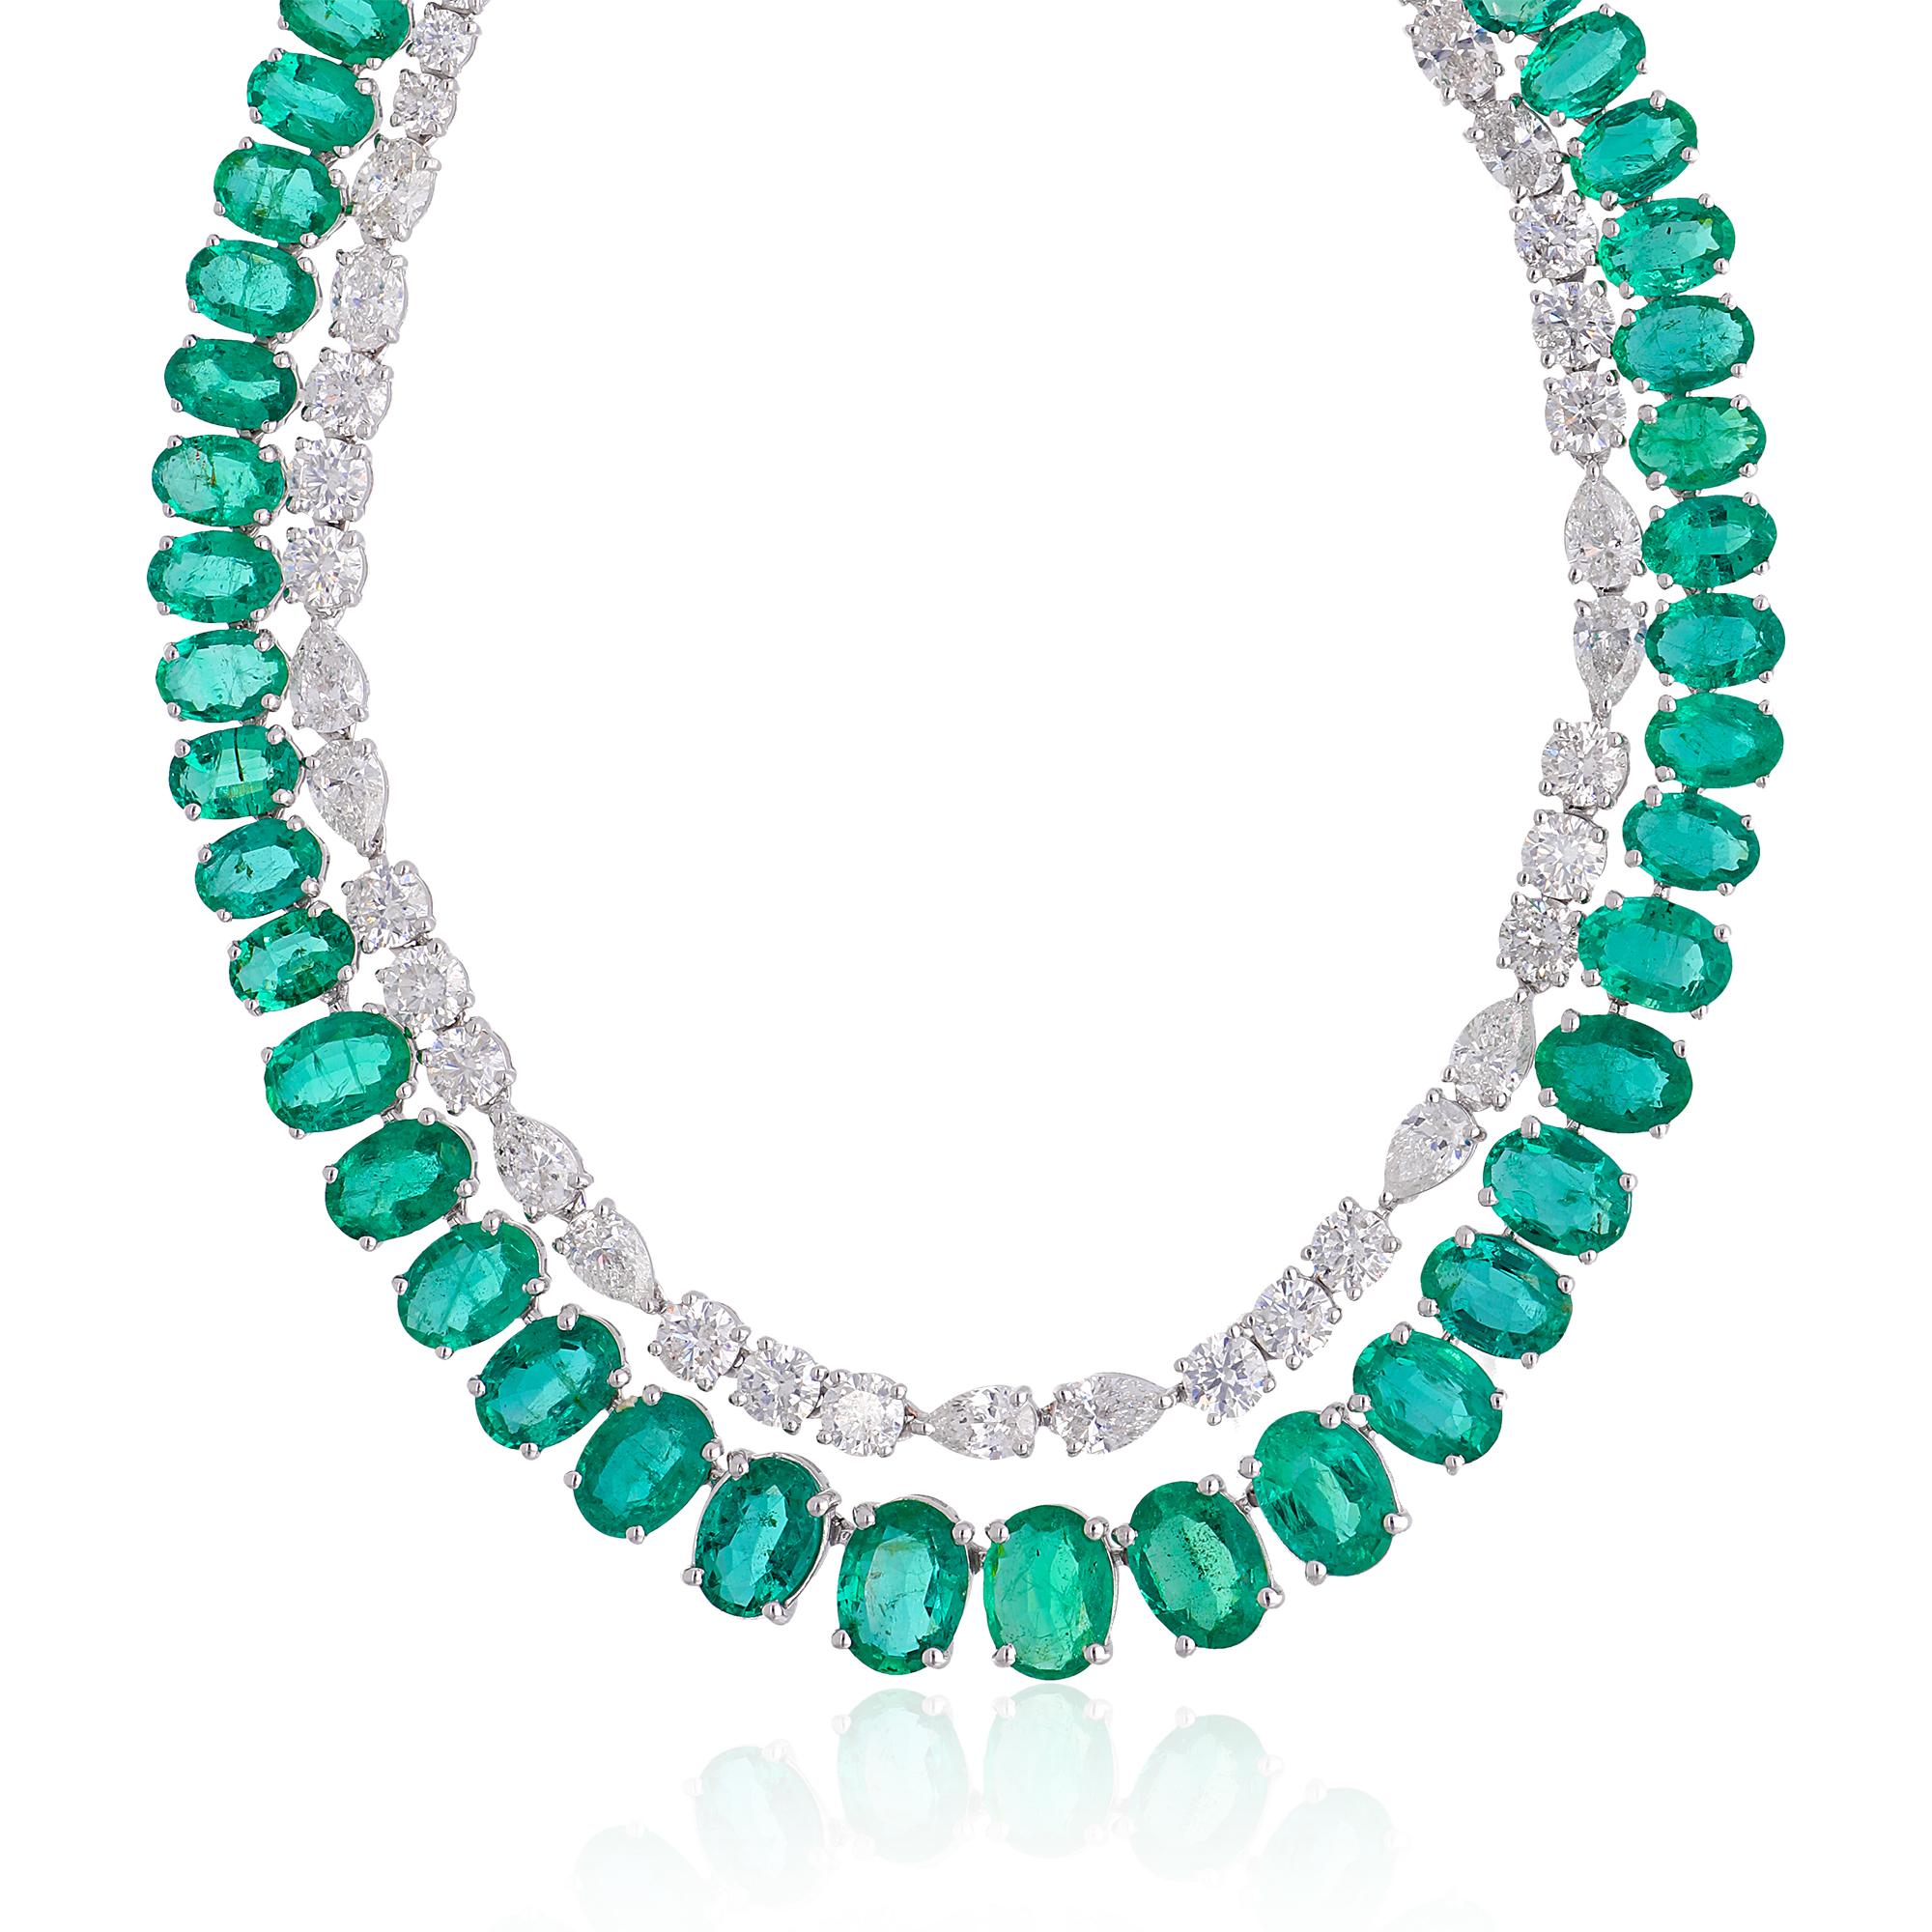 The emerald is complemented by sparkling diamond accents, adding a touch of brilliance and glamour to the necklace. The diamonds are carefully selected for their exceptional quality, exhibiting exceptional clarity and brilliance. Their presence